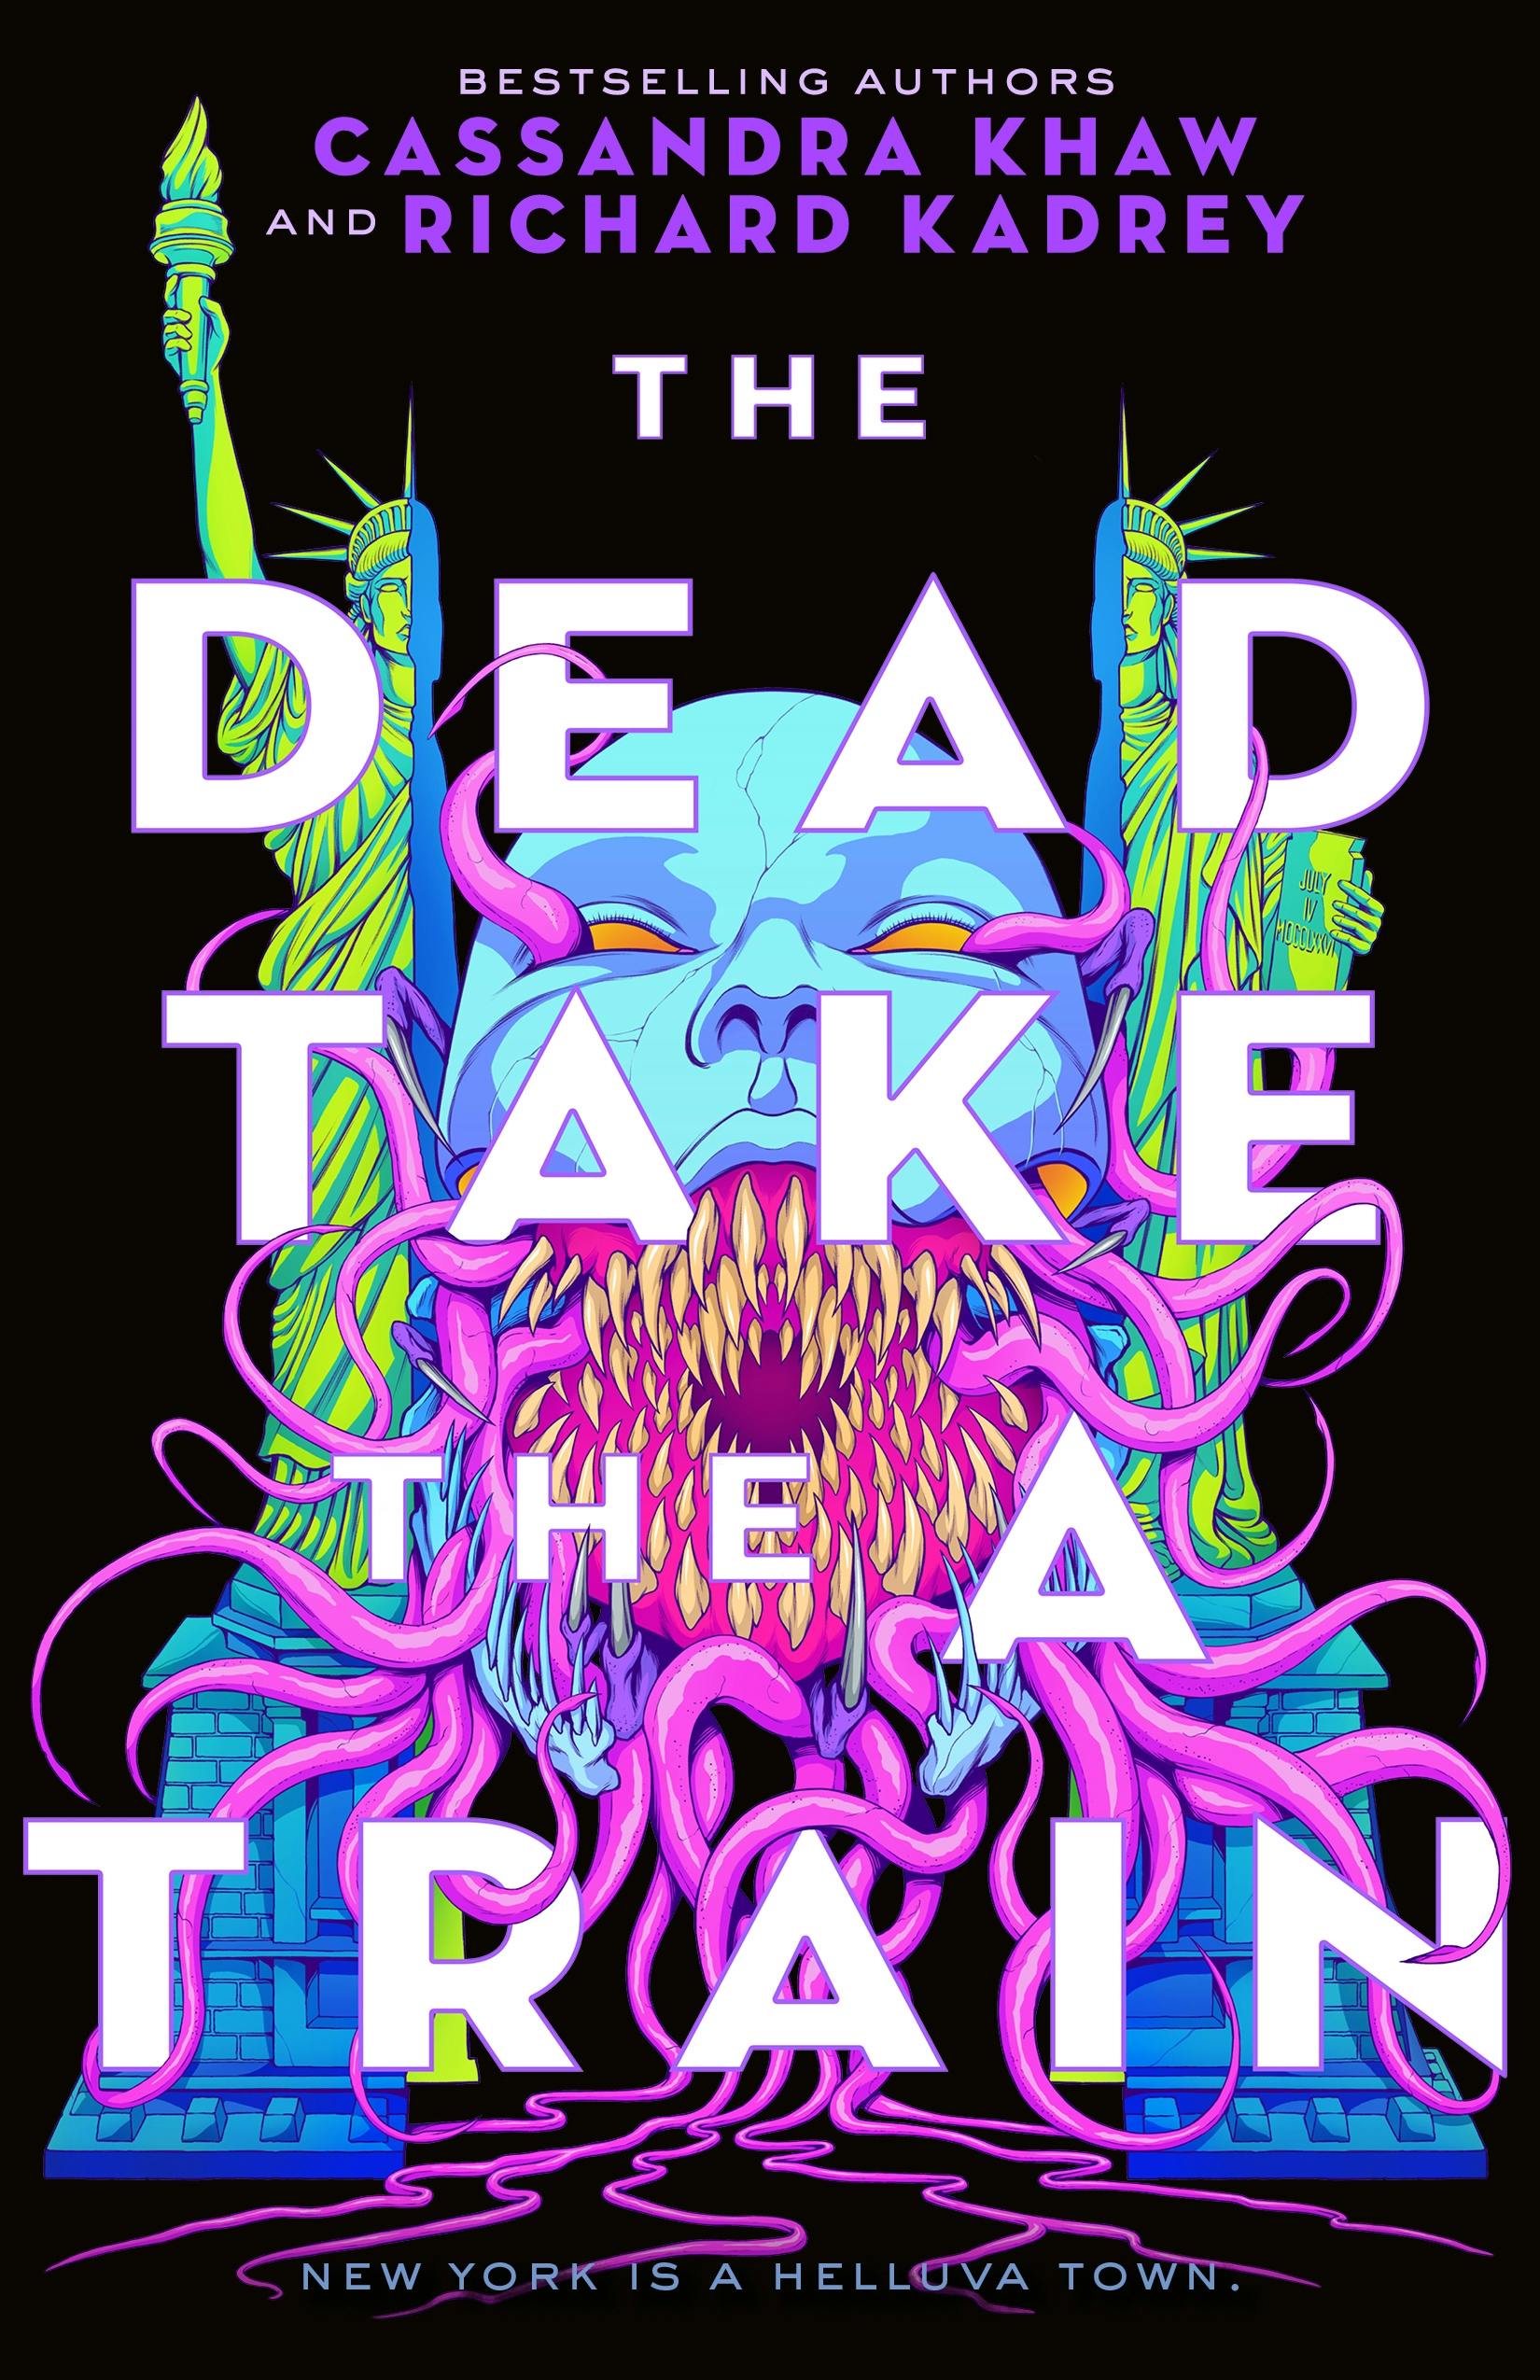 Cover for the book titled as: The Dead Take the A Train